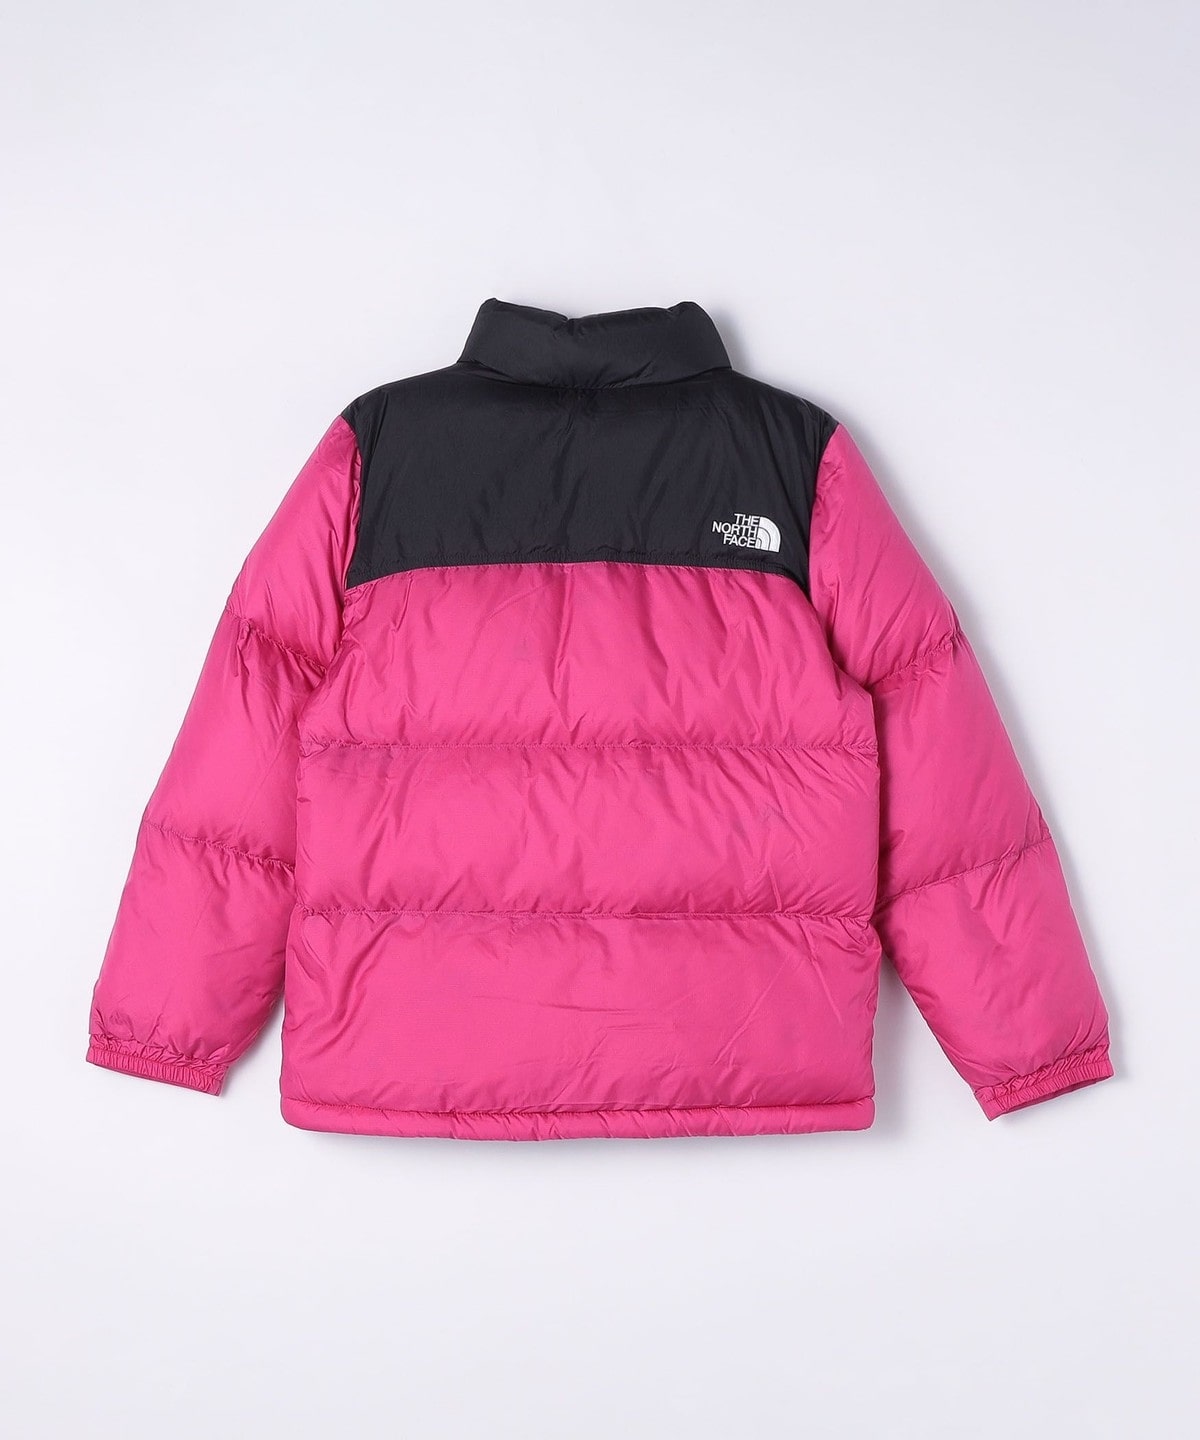 THE NORTHFACE ダウン　ピンク　130